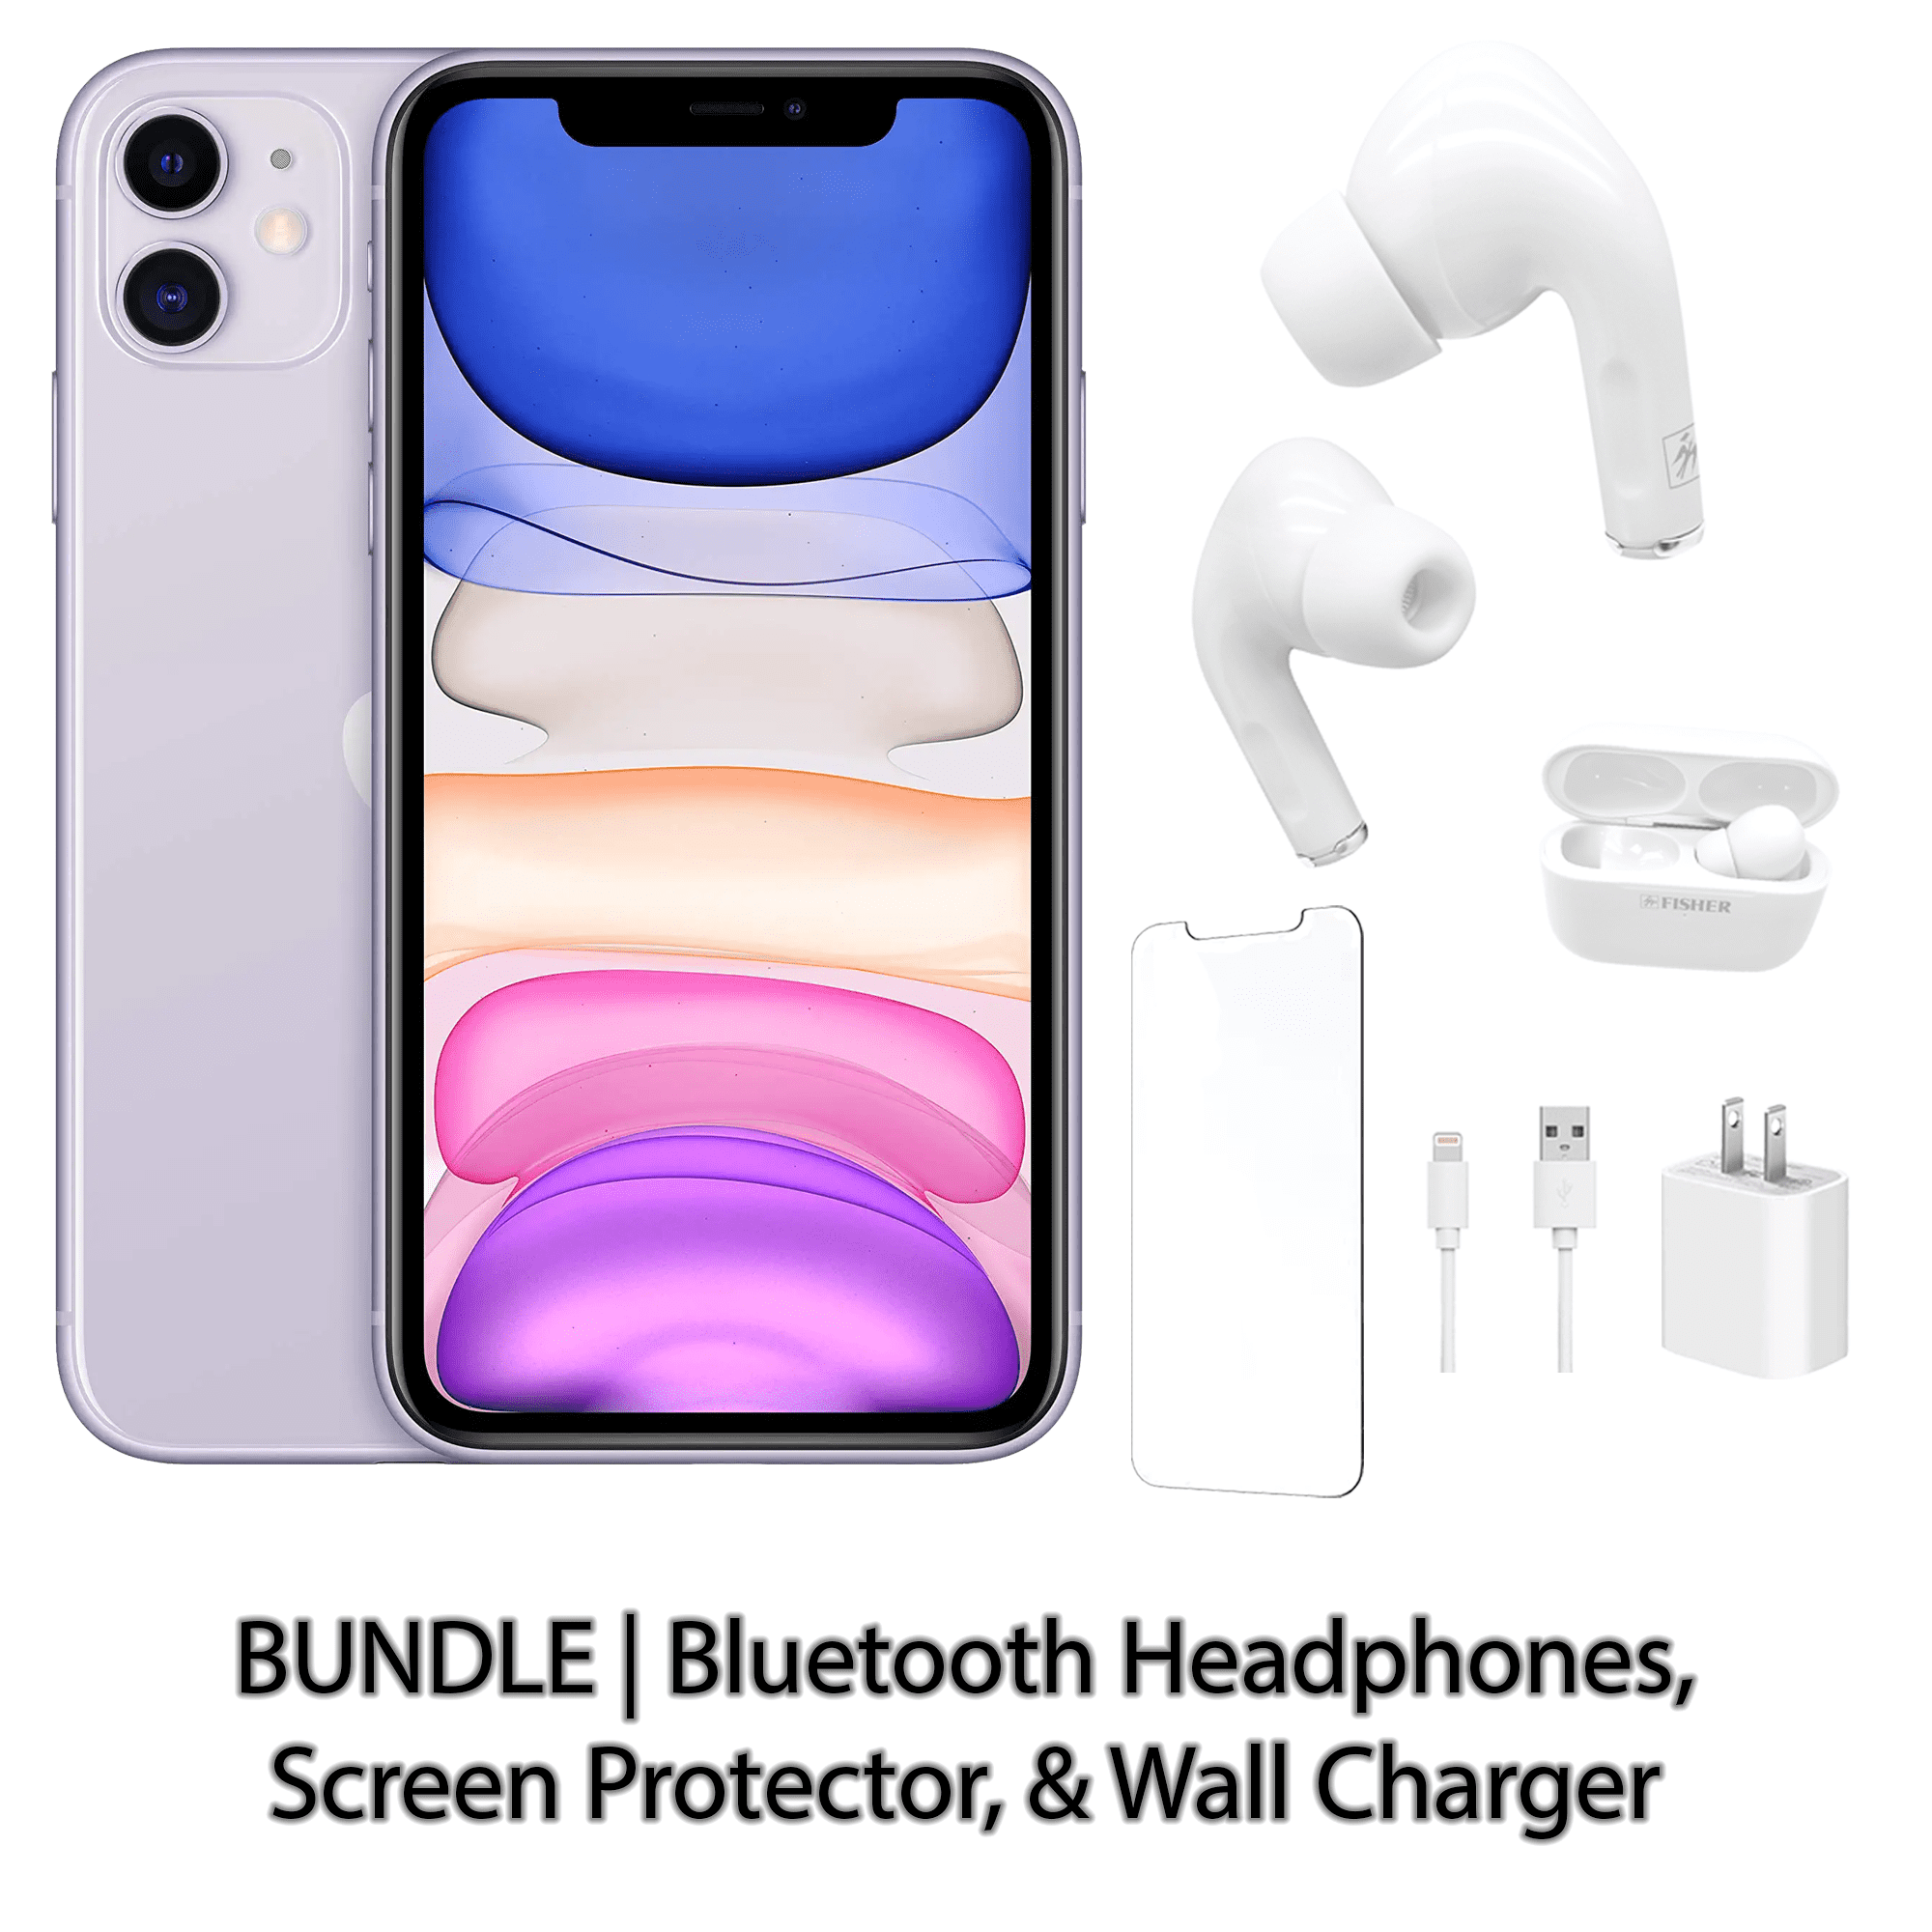 Bluetooth 64GB Apple Protector, Charger iPhone & Unlocked Fully Restored Black with Screen 11 Headphones, Wall (Refurbished)